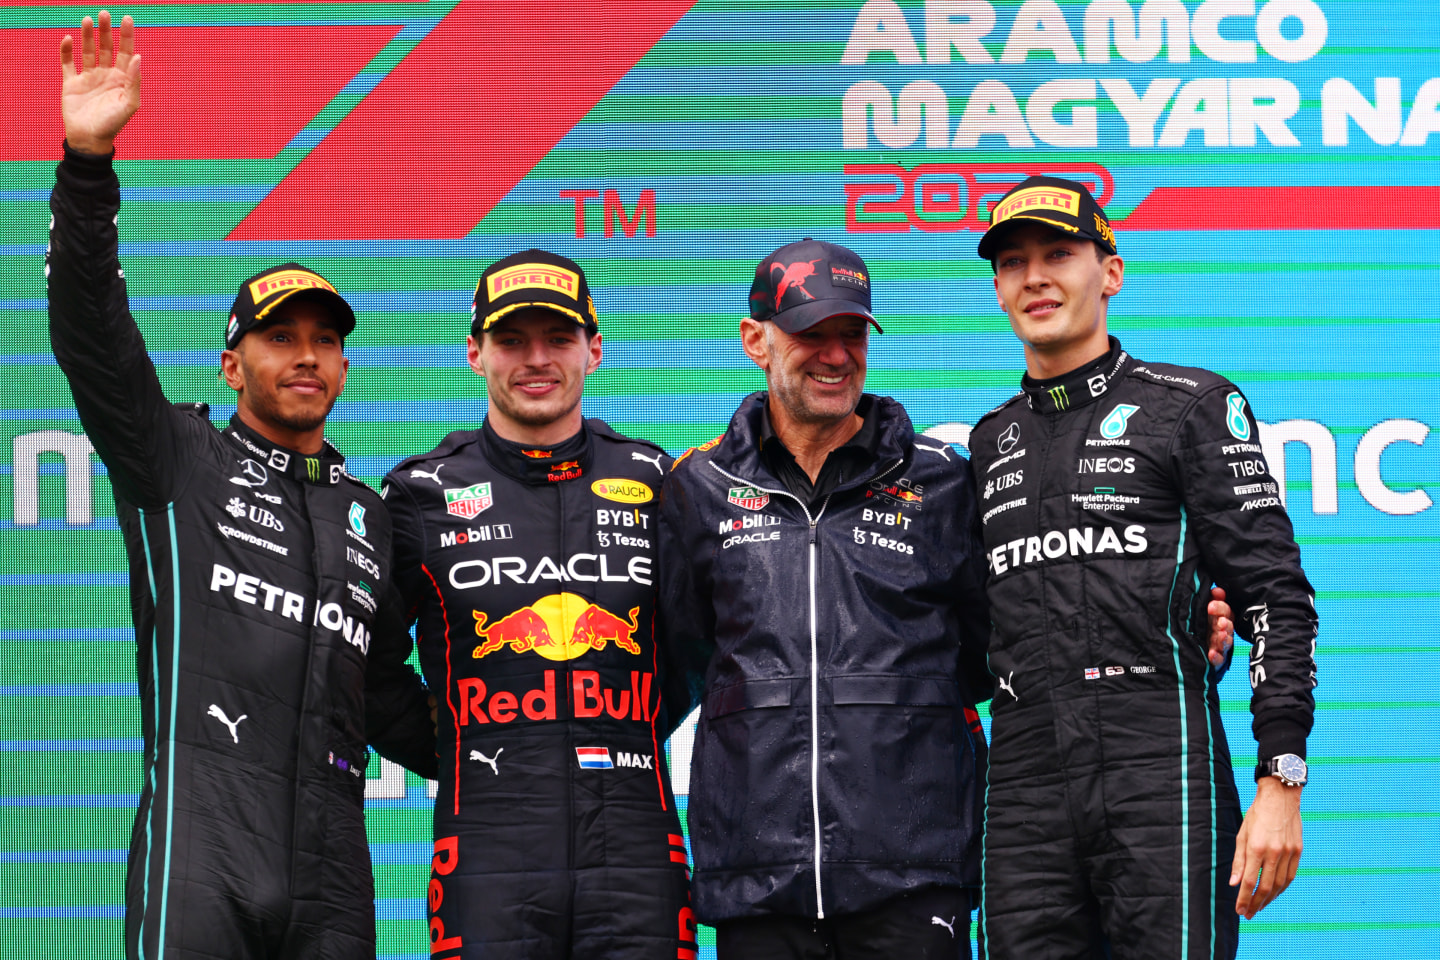 BUDAPEST, HUNGARY - JULY 31: Race winner Max Verstappen of the Netherlands and Oracle Red Bull Racing (second from left), Second placed Lewis Hamilton of Great Britain and Mercedes (L), Third placed George Russell of Great Britain and Mercedes (R) and Adrian Newey, the Chief Technical Officer of Red Bull Racing (second from right) celebrate on the podium during the F1 Grand Prix of Hungary at Hungaroring on July 31, 2022 in Budapest, Hungary. (Photo by Bryn Lennon - Formula 1/Formula 1 via Getty Images)